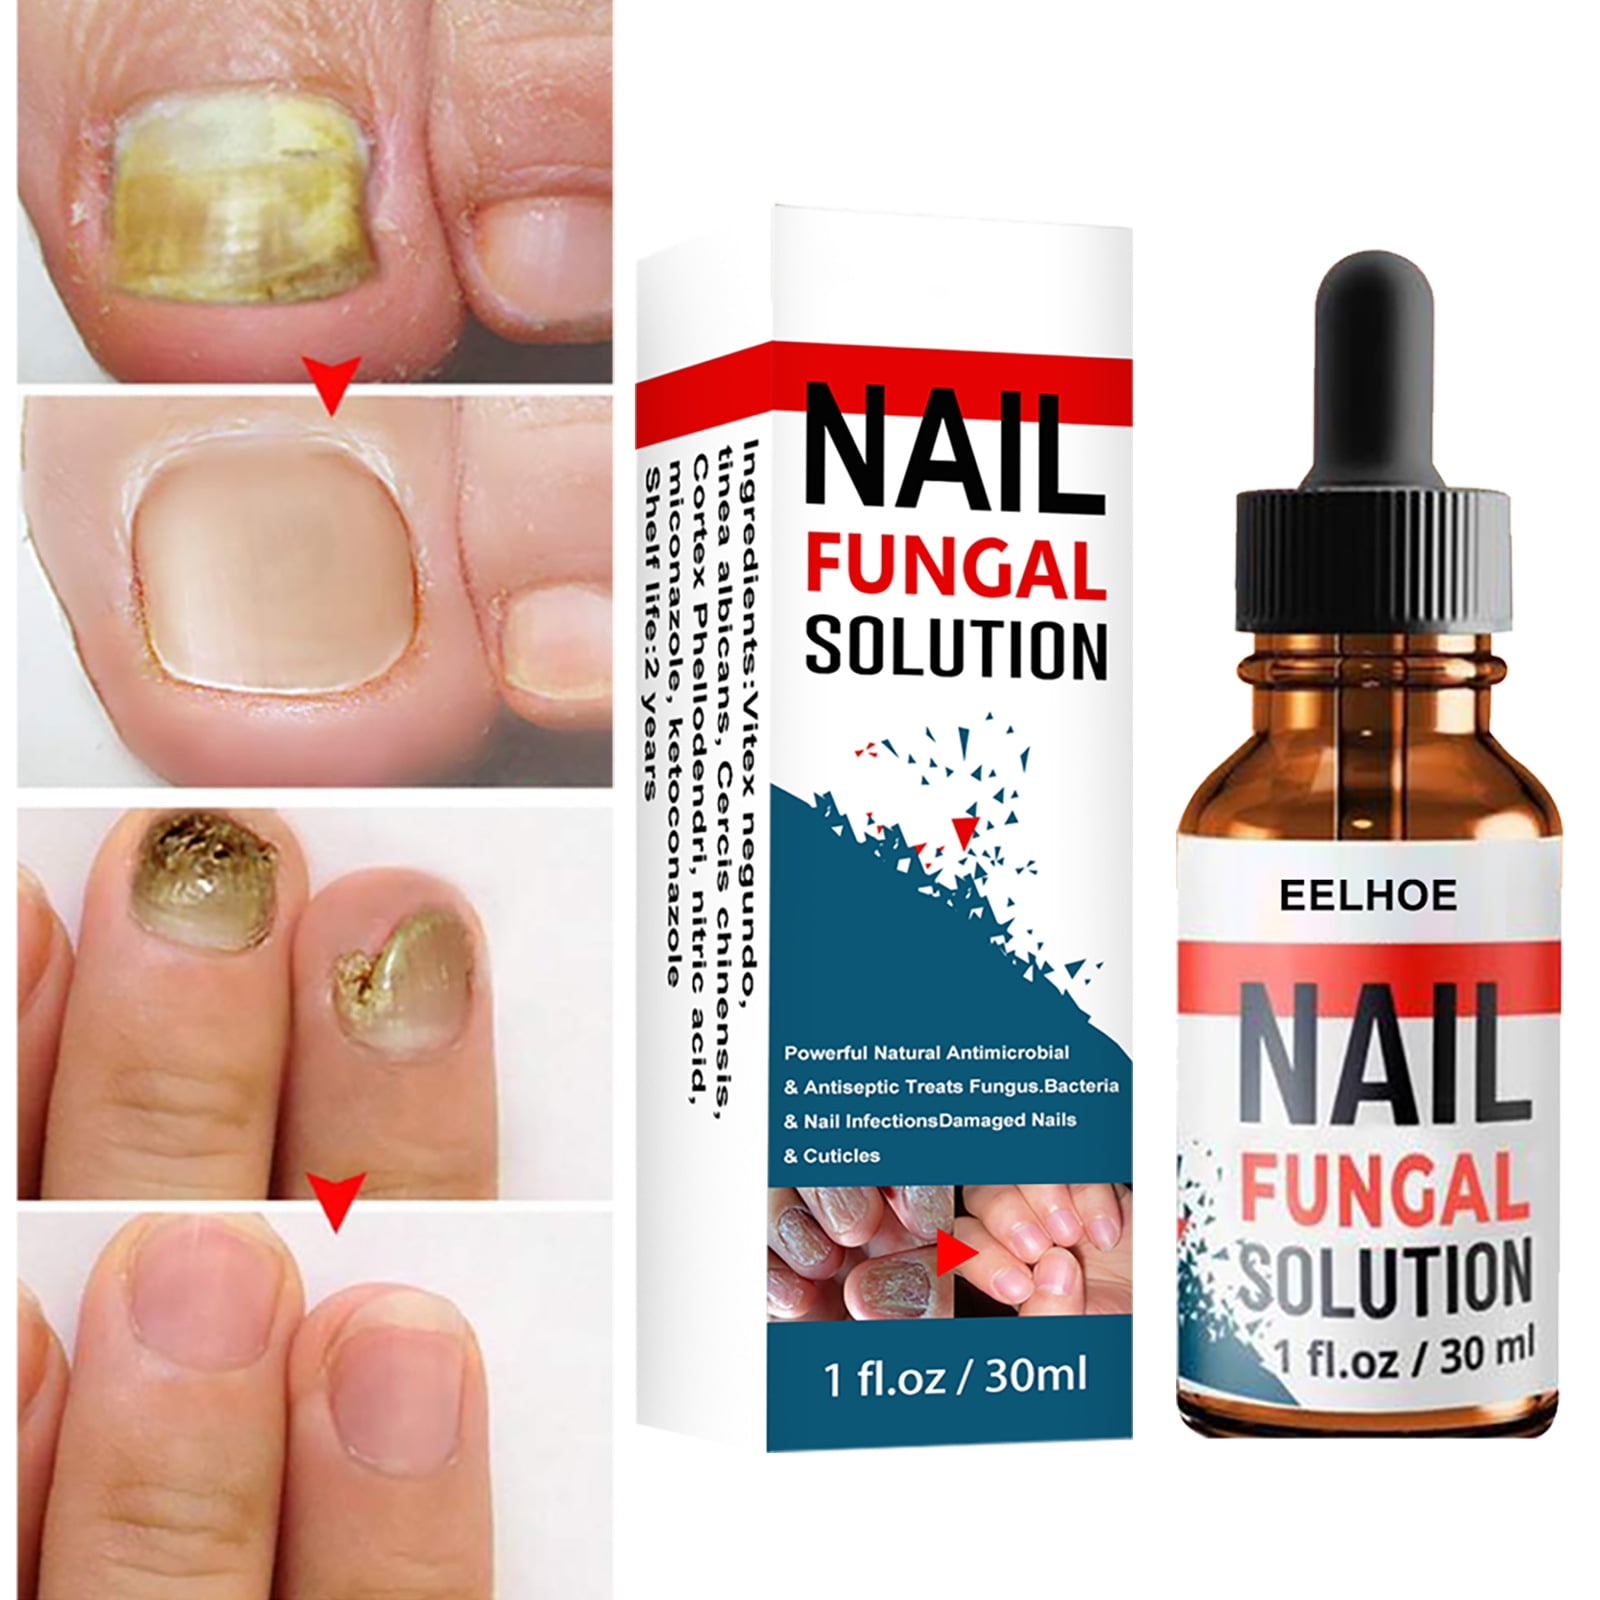 Laser Nail Fungus Therapy At Home | Best Way To Get Rid of Toe Fungus